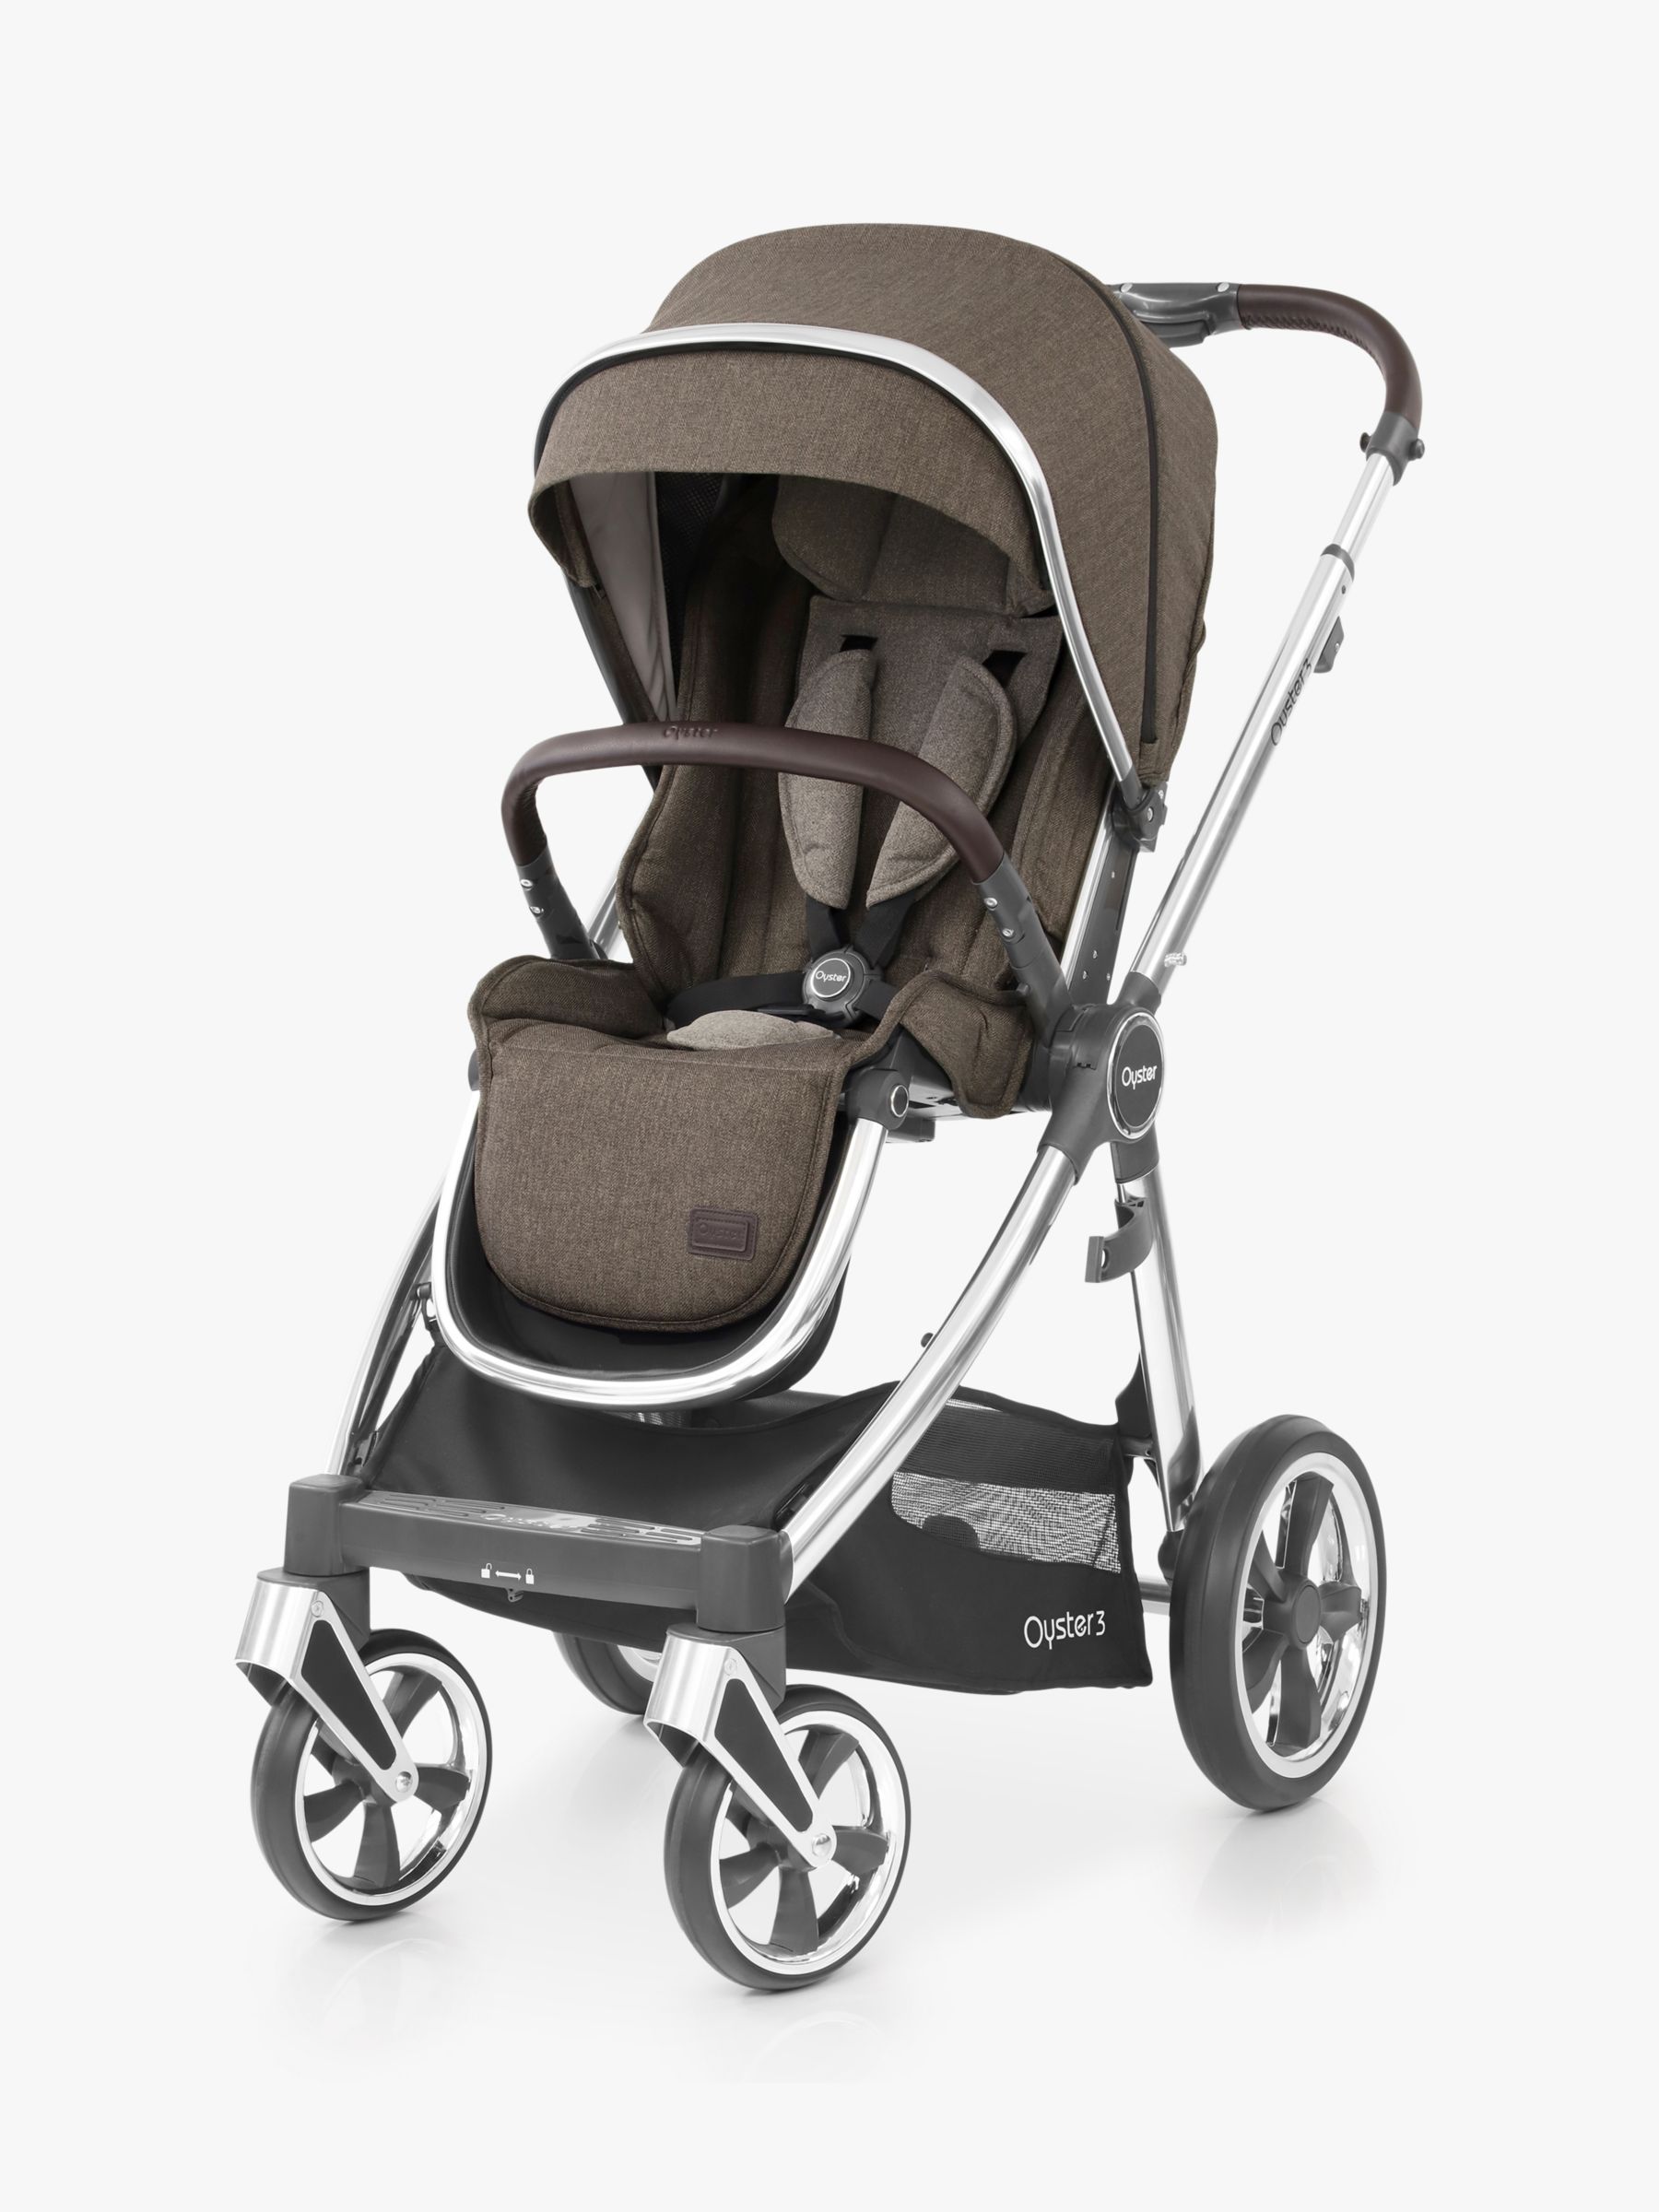 Image of Oyster3 Pushchair MirrorTruffle